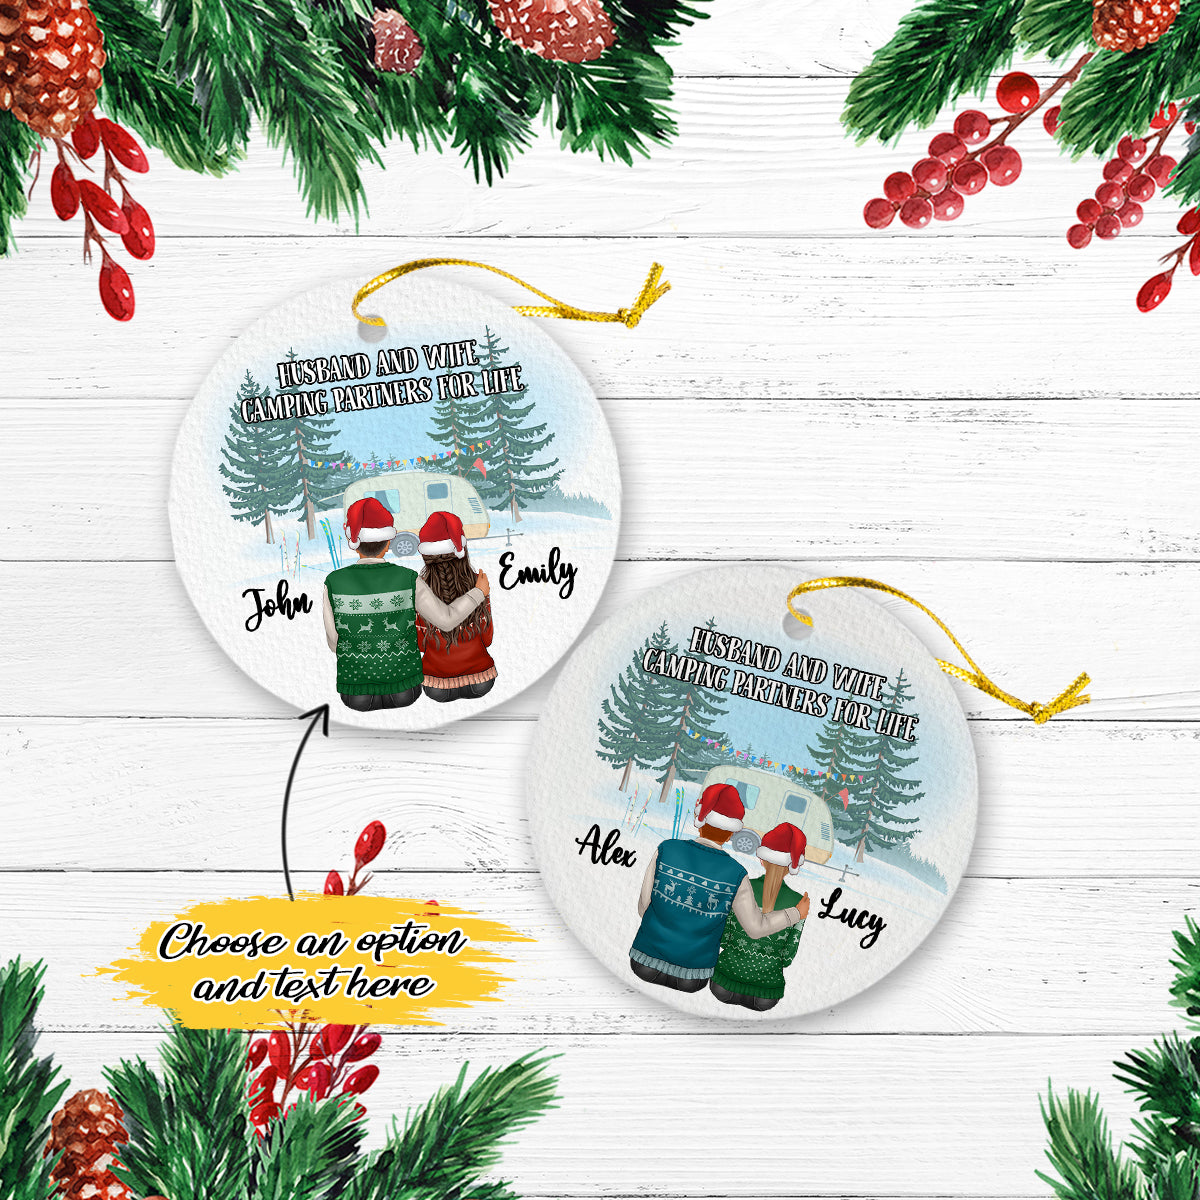 Husband And Wife Camping Partners For Life Personalized Christmas Premium Ceramic Ornaments Sets